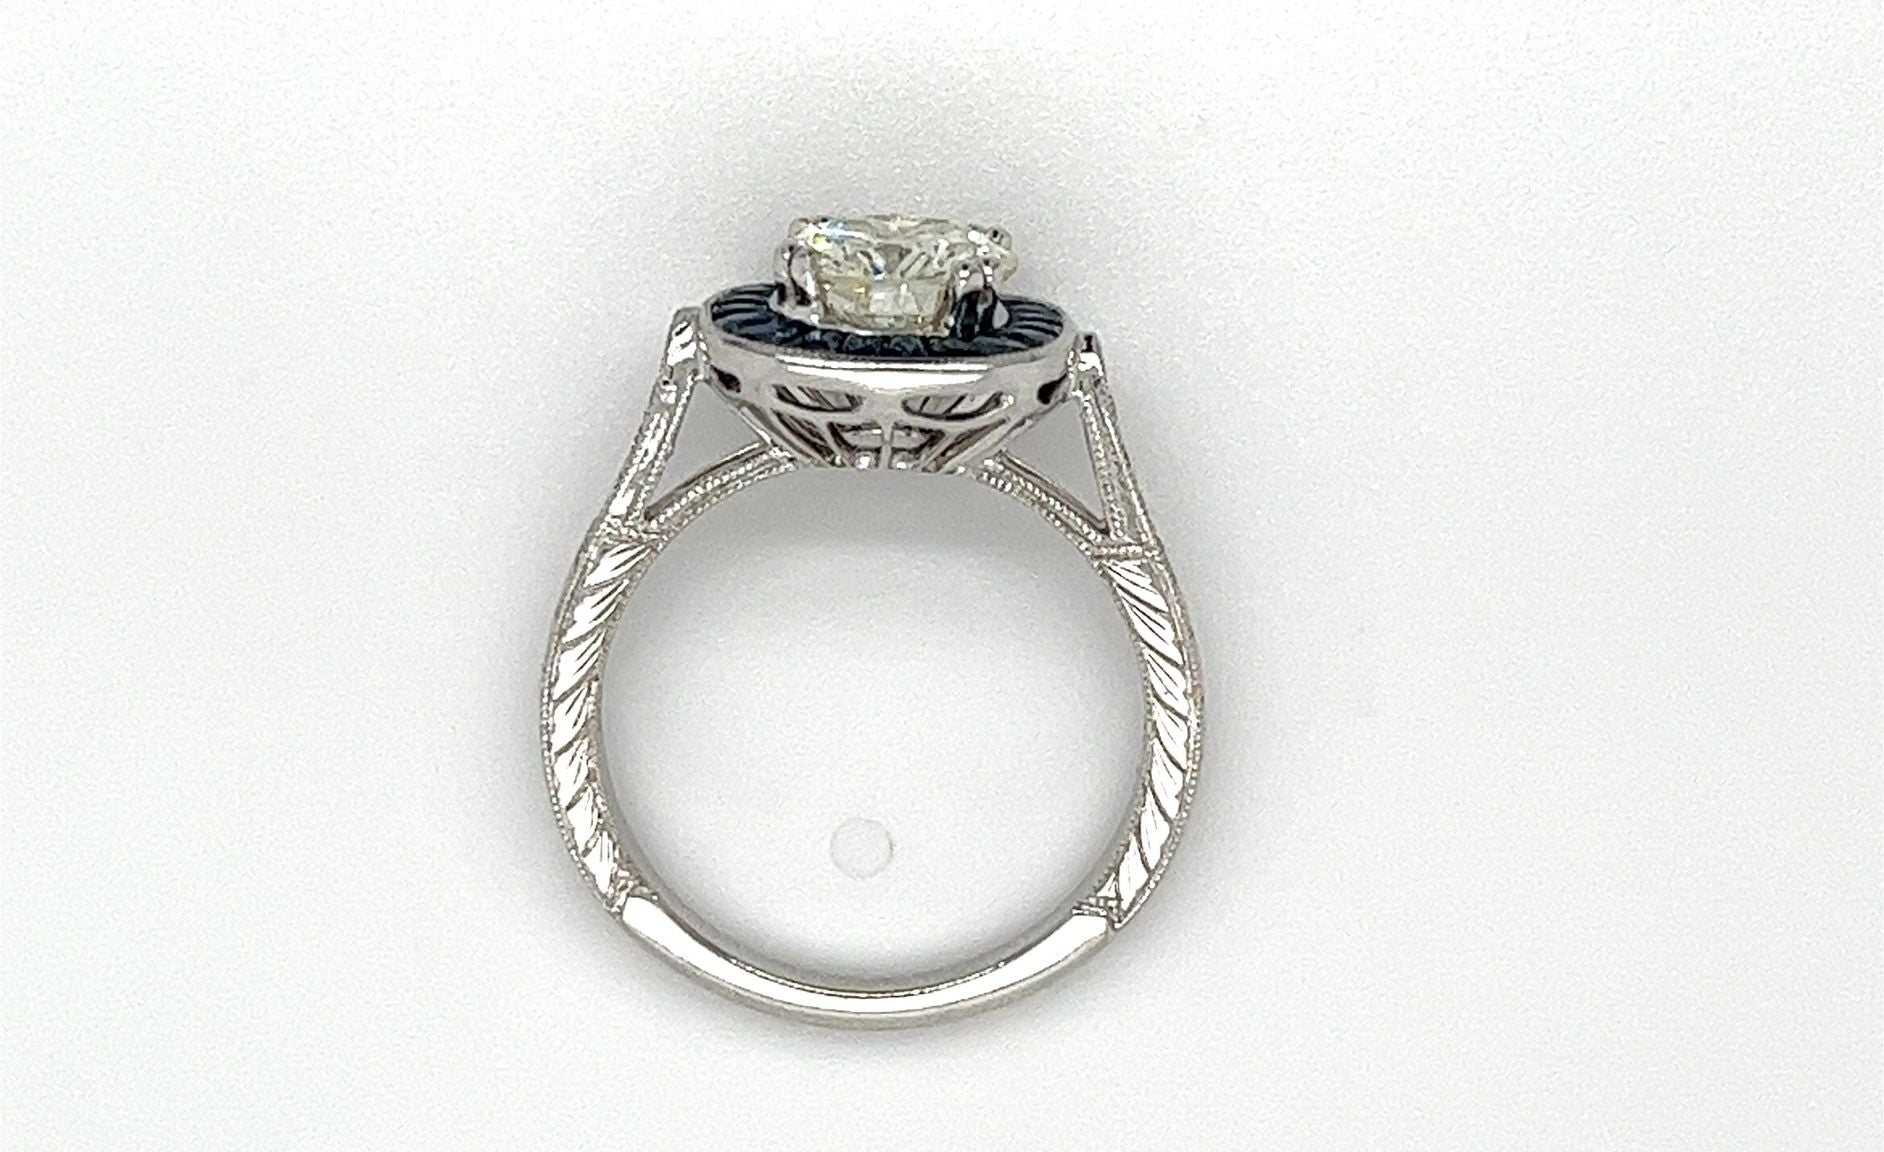 Buy 14K White Gold Filigree Engagement Ring Setting 8x6mm Emerald Cut  Radiant Vintage Style Antique Classic 12609 Online in India - Etsy